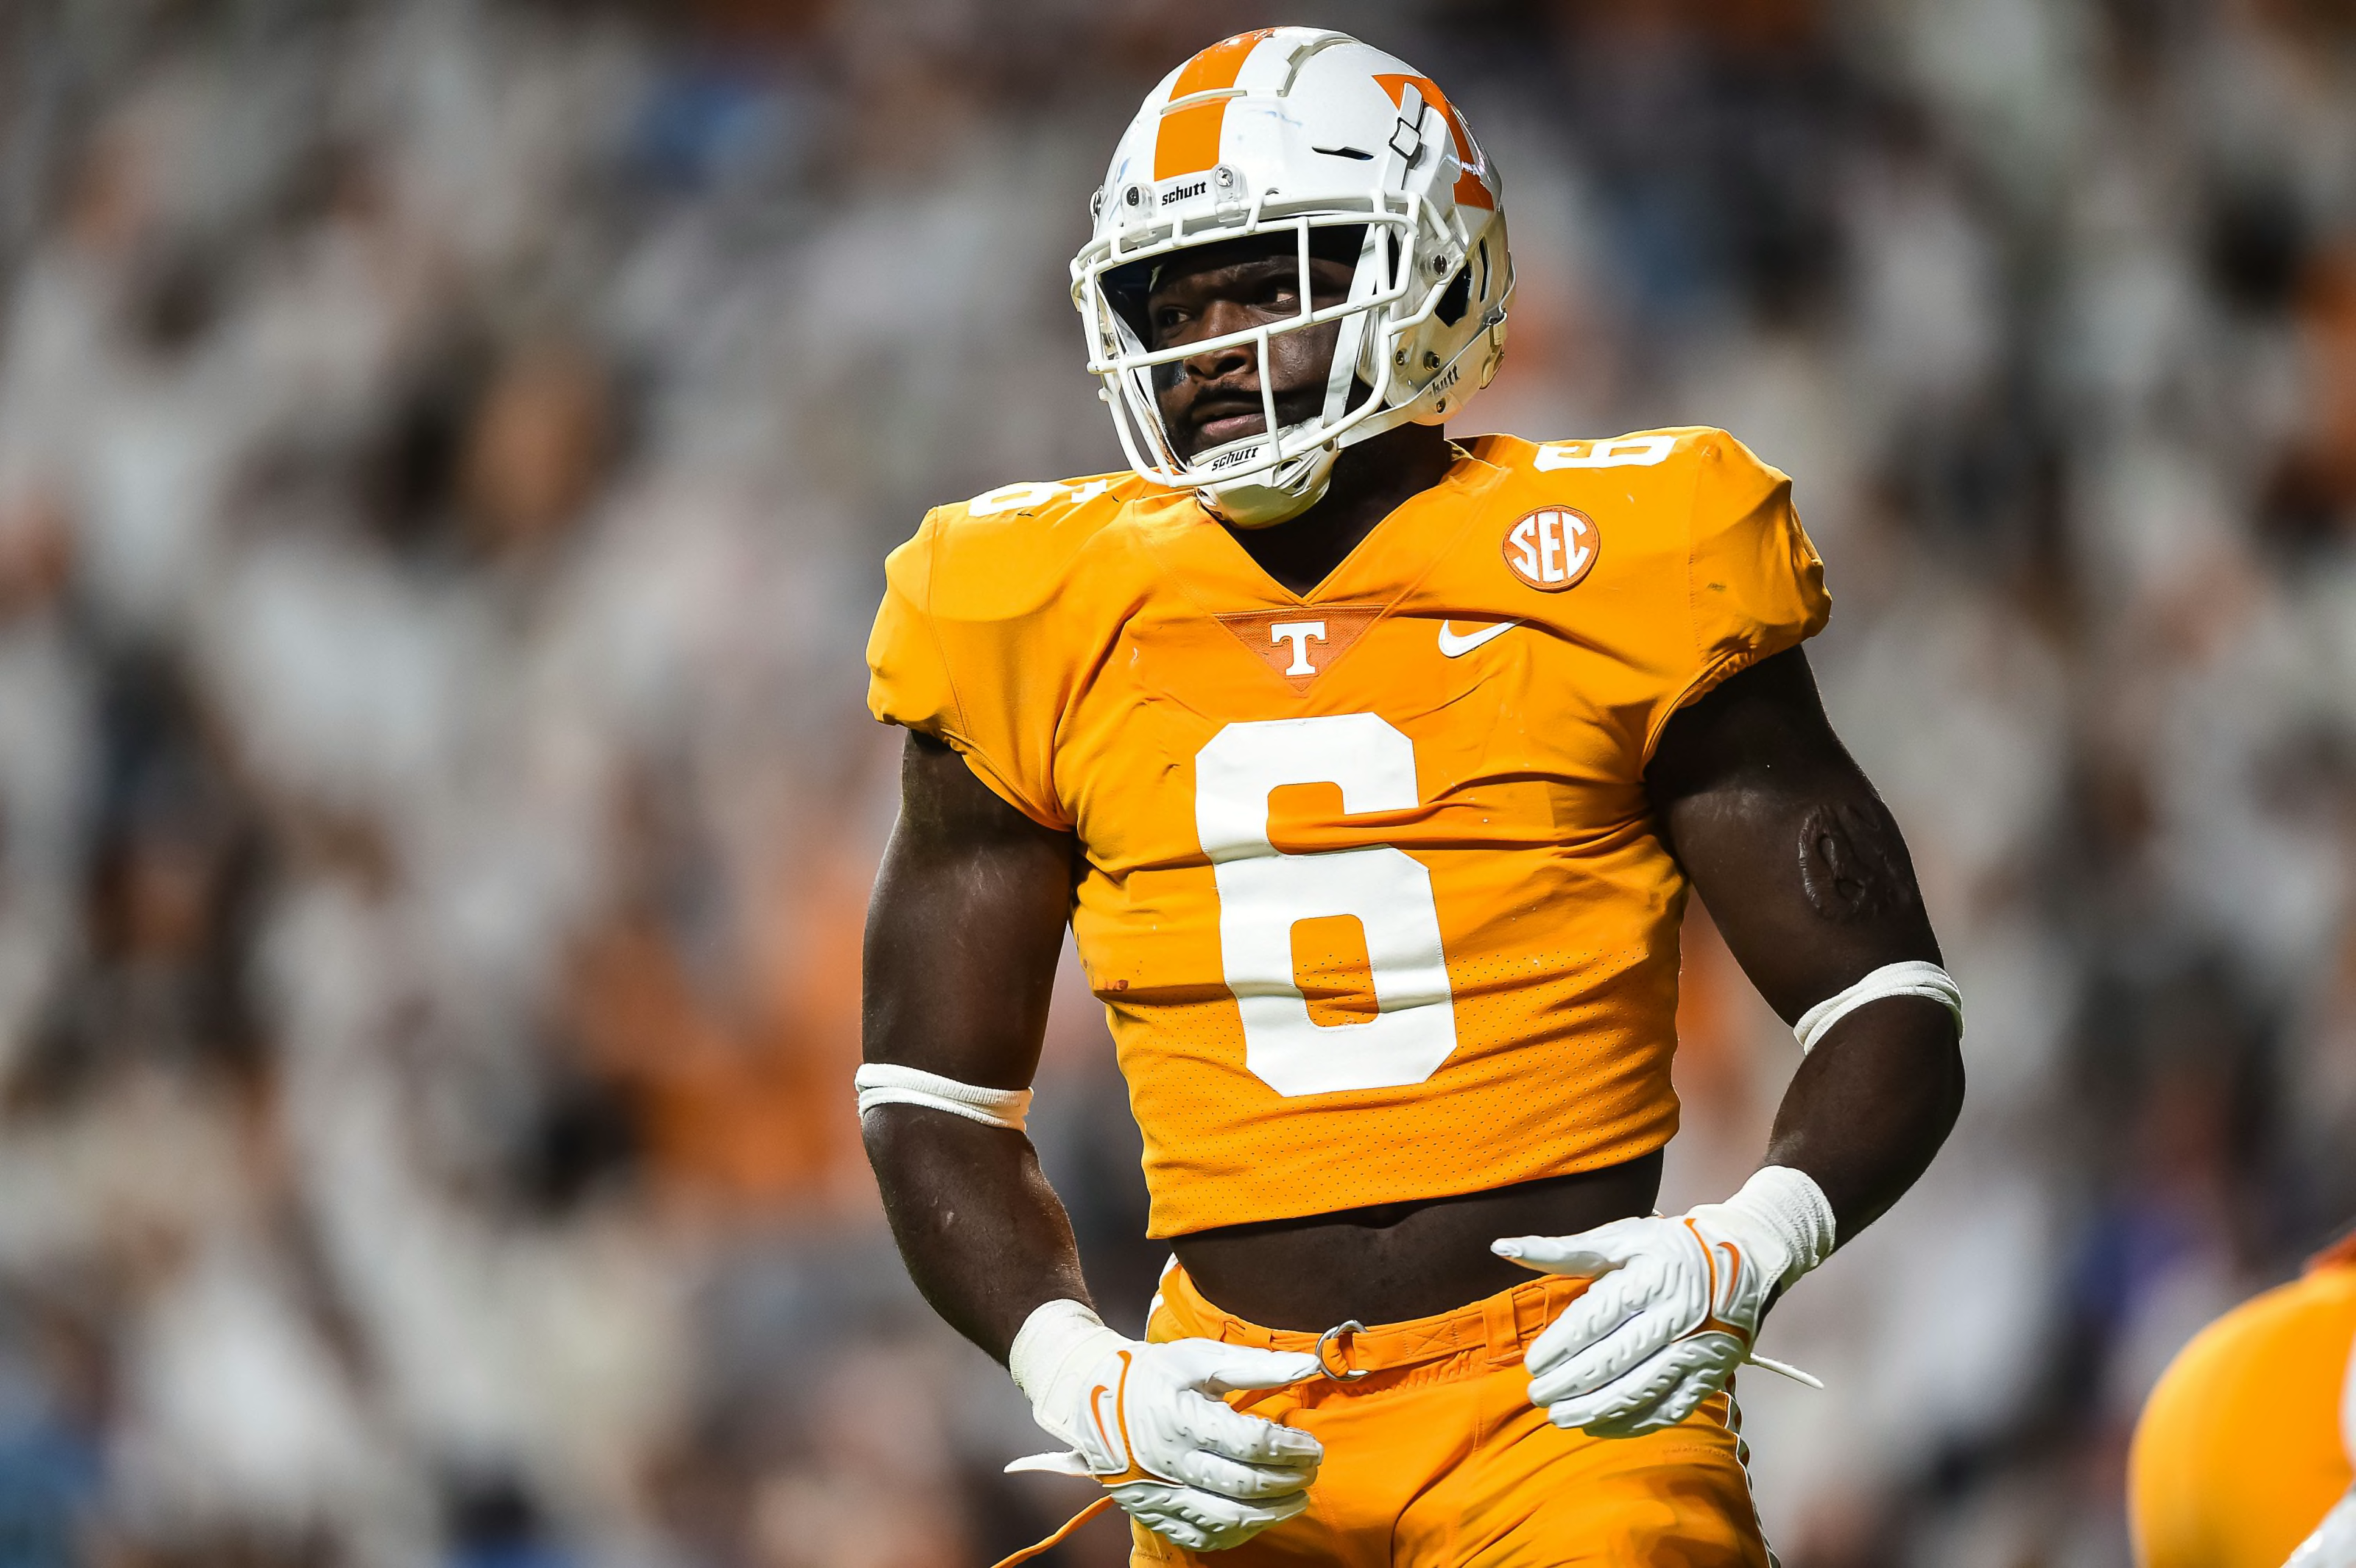 Tennessee football Five key Vols to watch for vs. Kentucky Wildcats